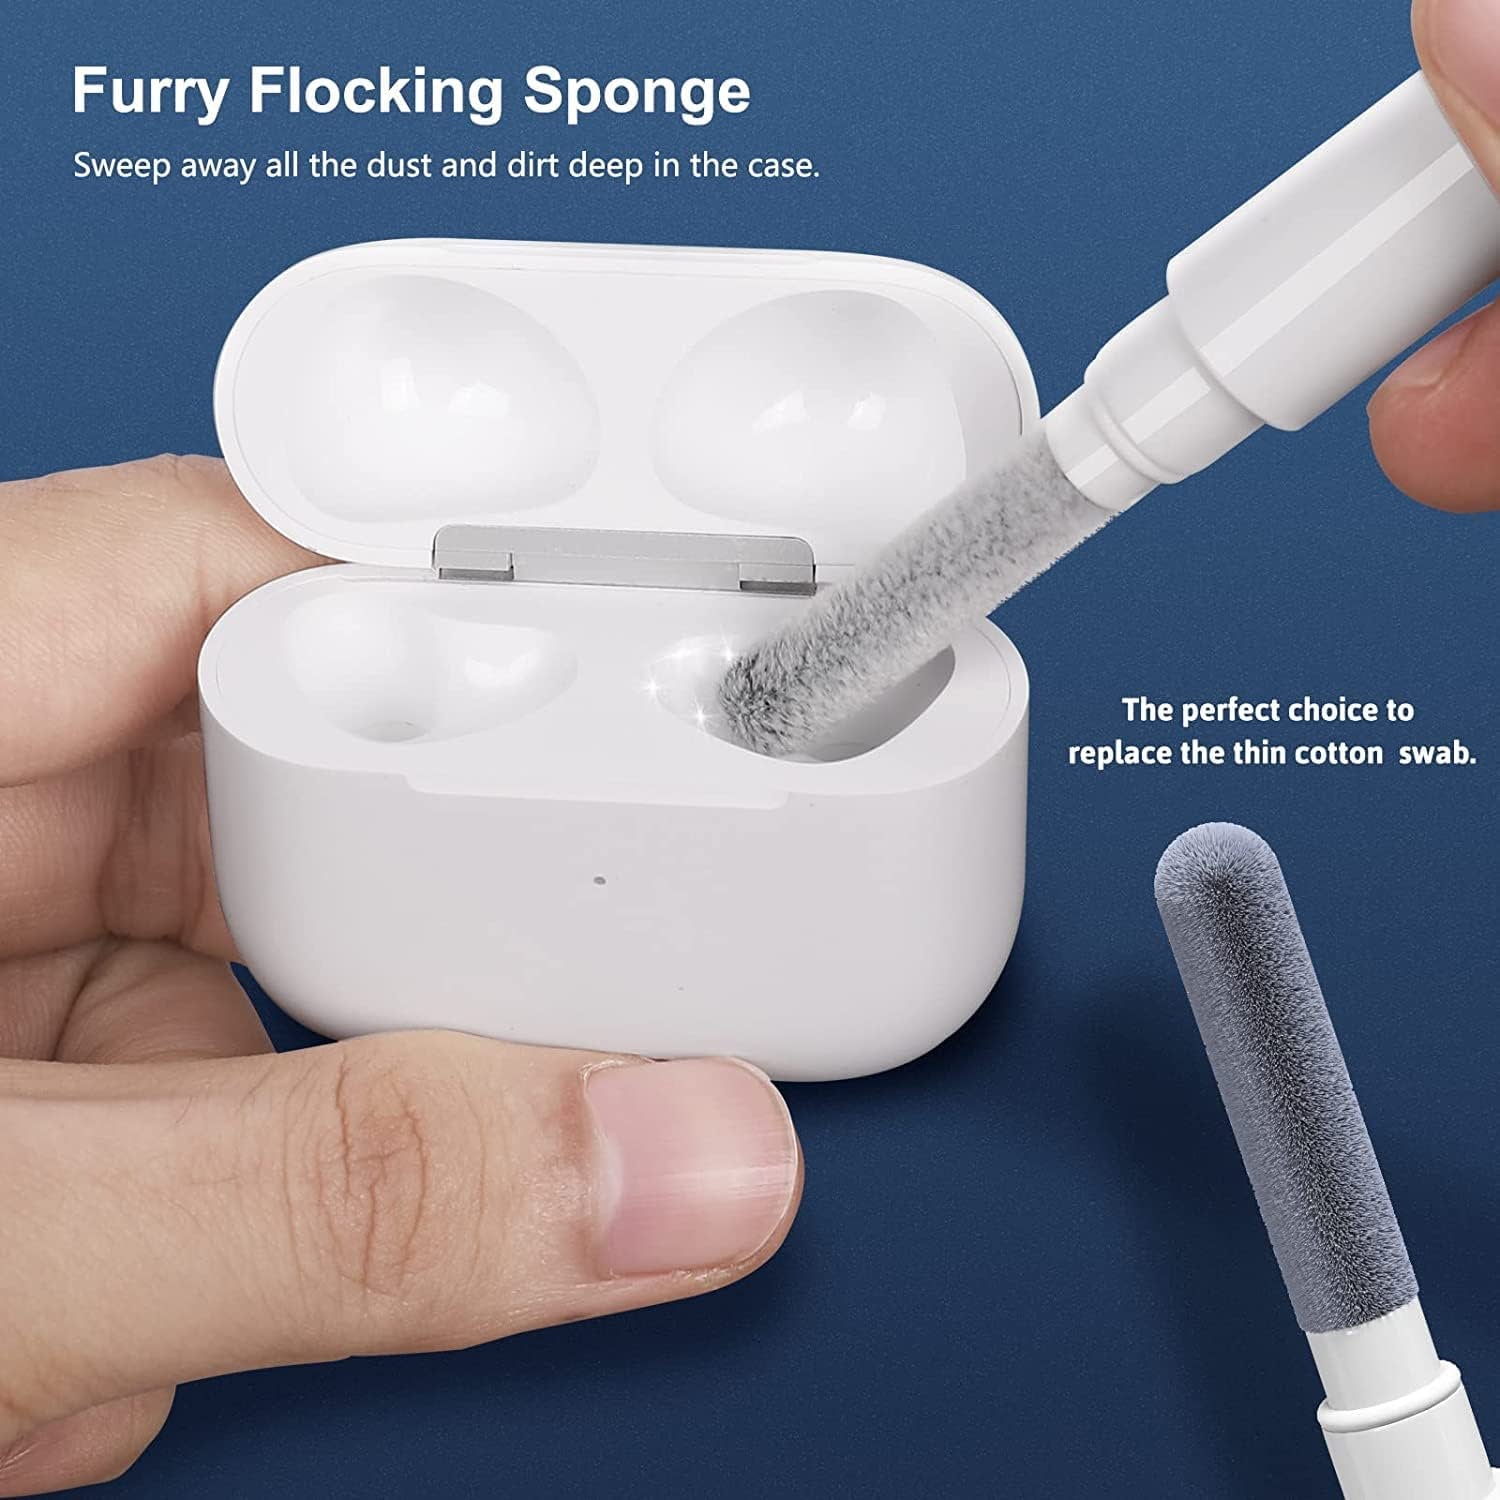 Bluetooth Earphones Cleaning Tool for Airpods Pro 3 2 1 Durable Earbuds Case Cleaner Kit Clean Brush Pen for Xiaomi Airdots 3Pro